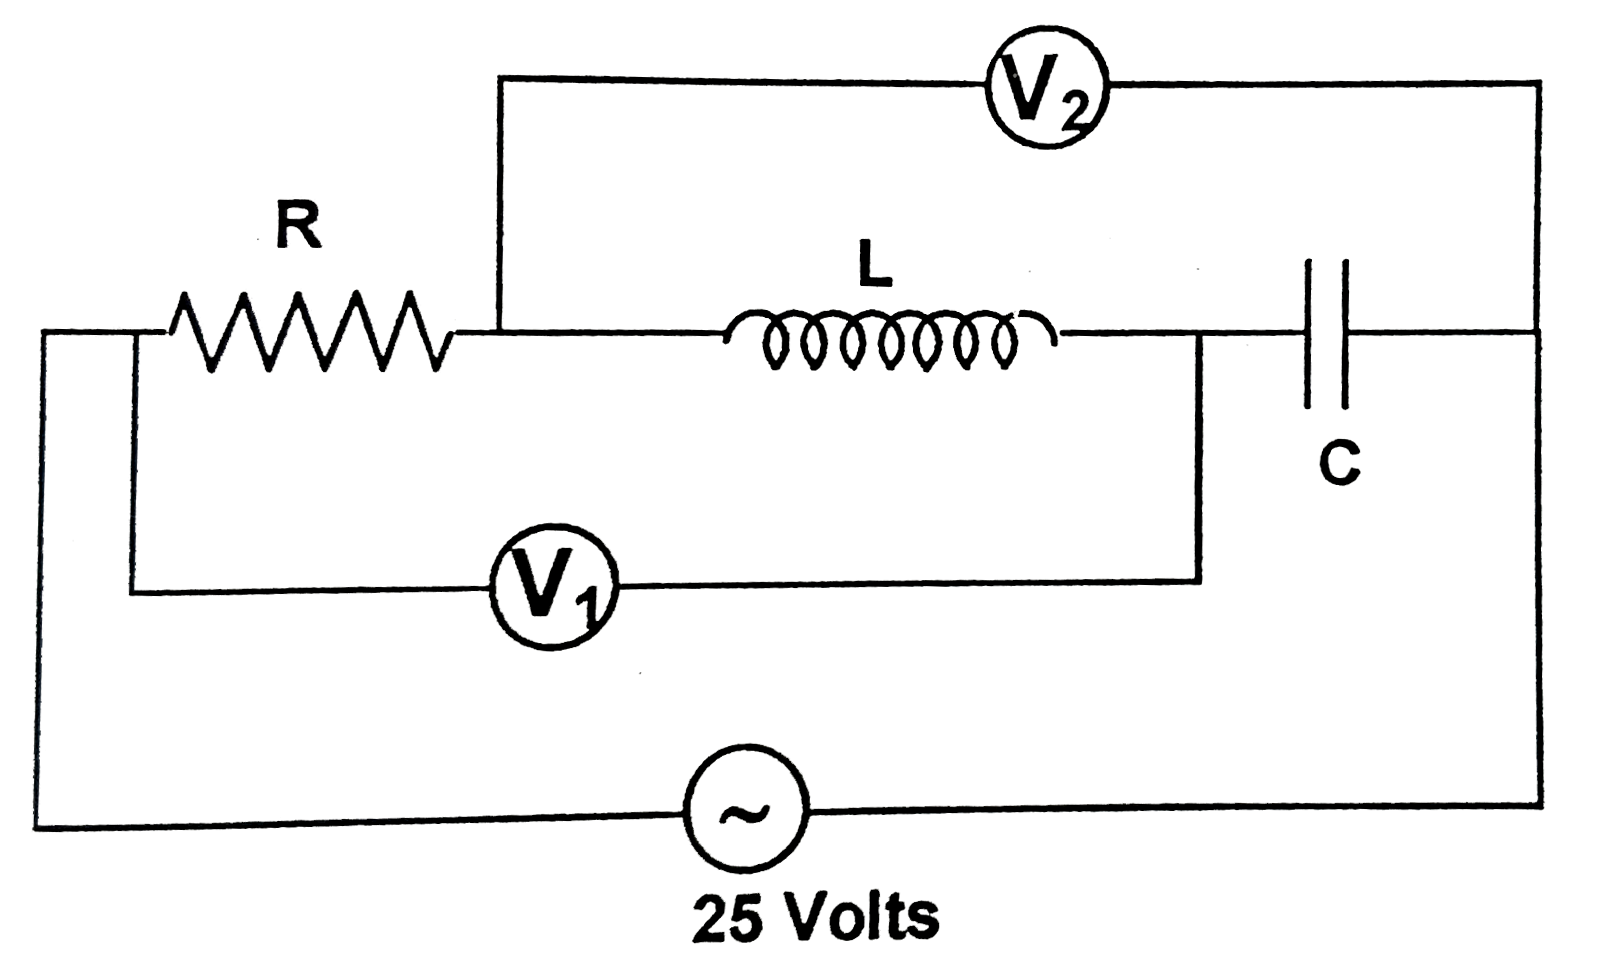 In an LCR series circuit, the reading of ideal voltmeters V(1) and V(2) are 20sqrt(2) volt and 15 volts respectively as shown in the figure (the given circuit in inductive in nature). Then